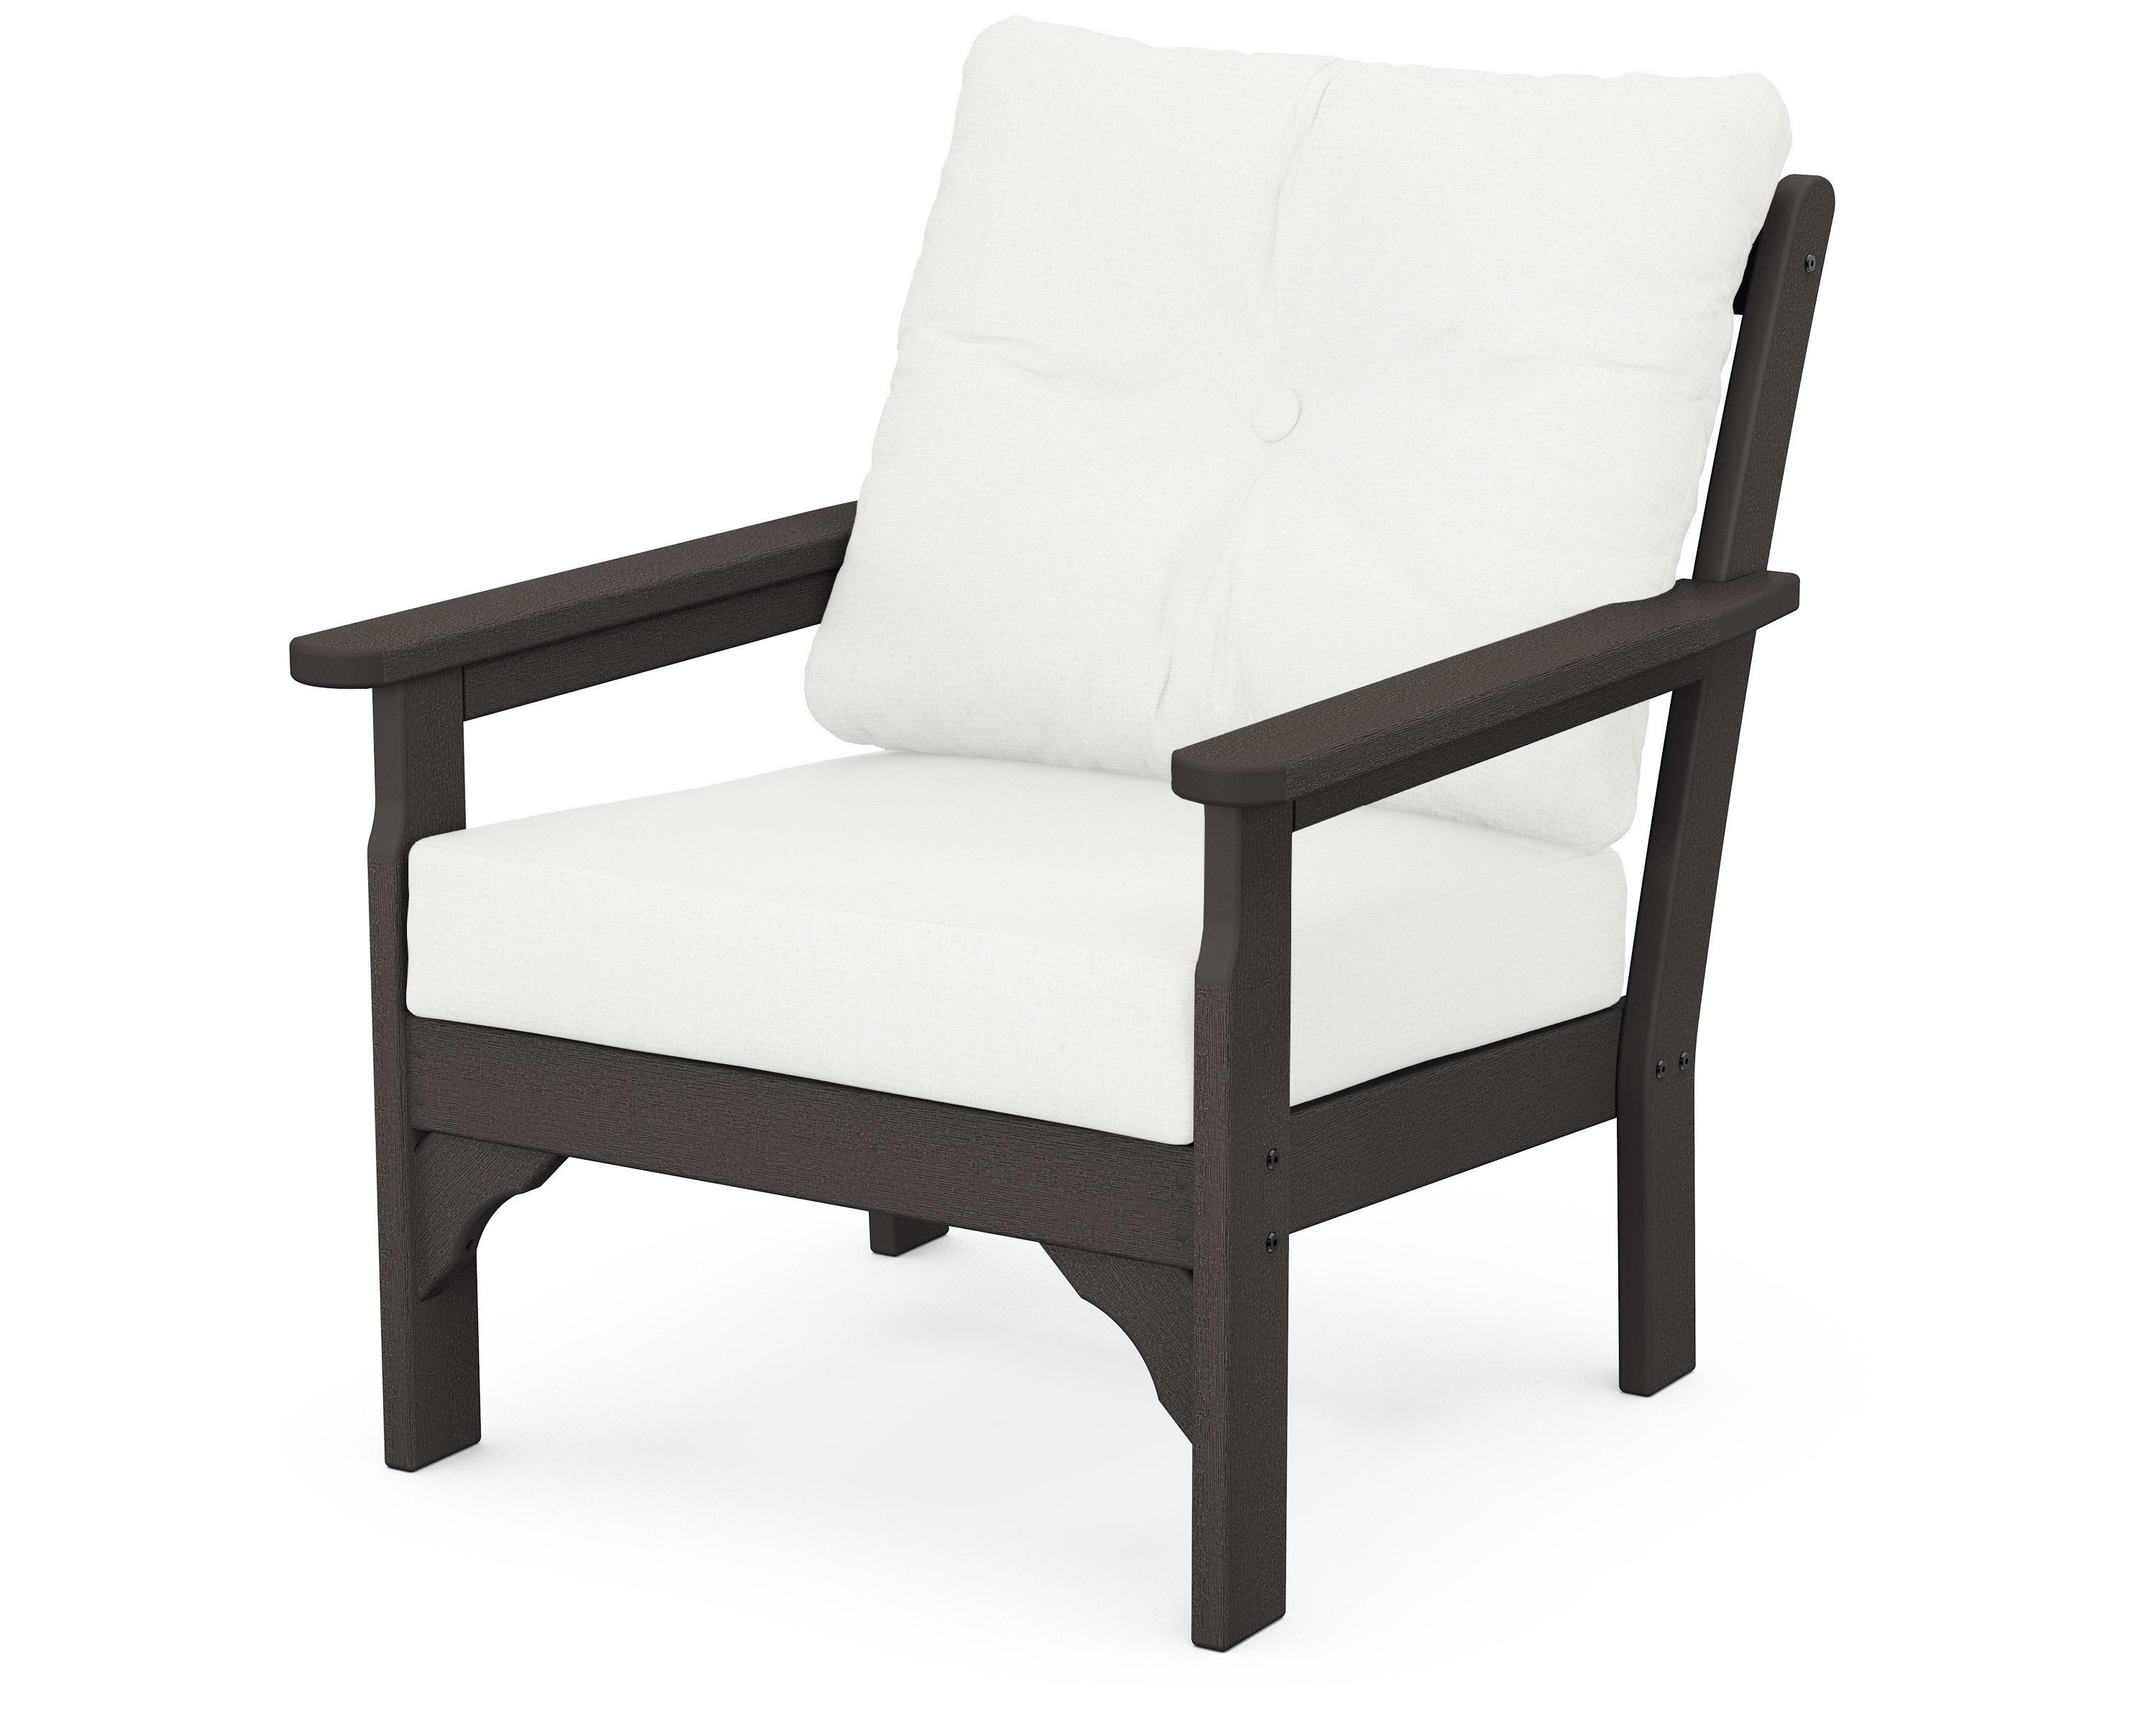 POLYWOOD Vineyard Deep Seating Chair in Vintage Finish